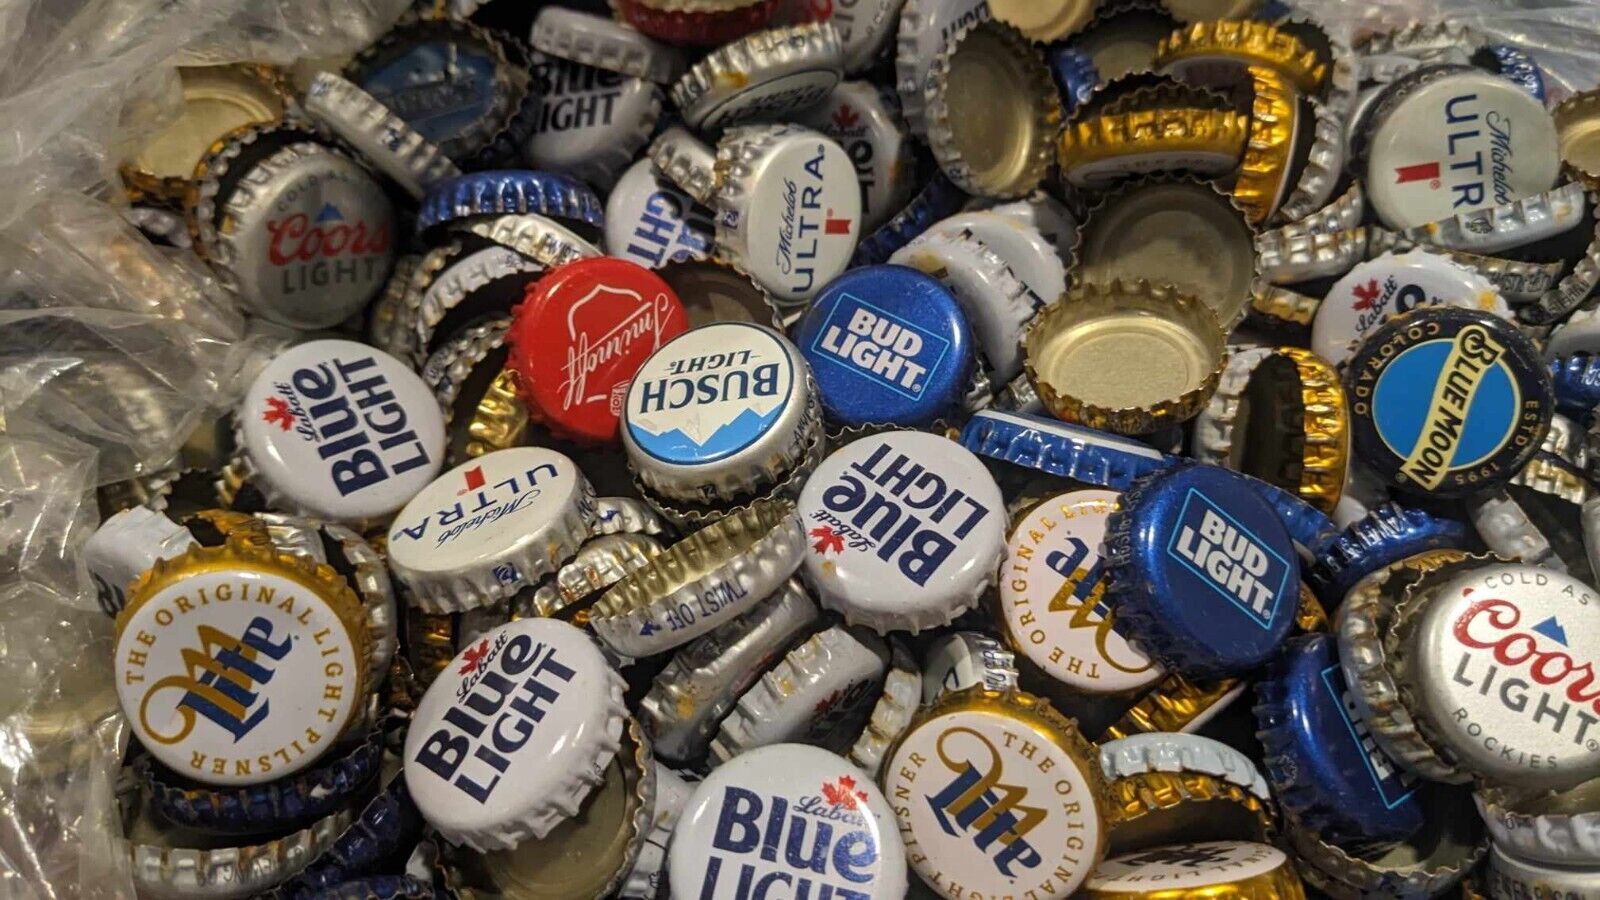 Lot of 600 Beer Bottle Caps Mixed Dent Free Great For Crafts 